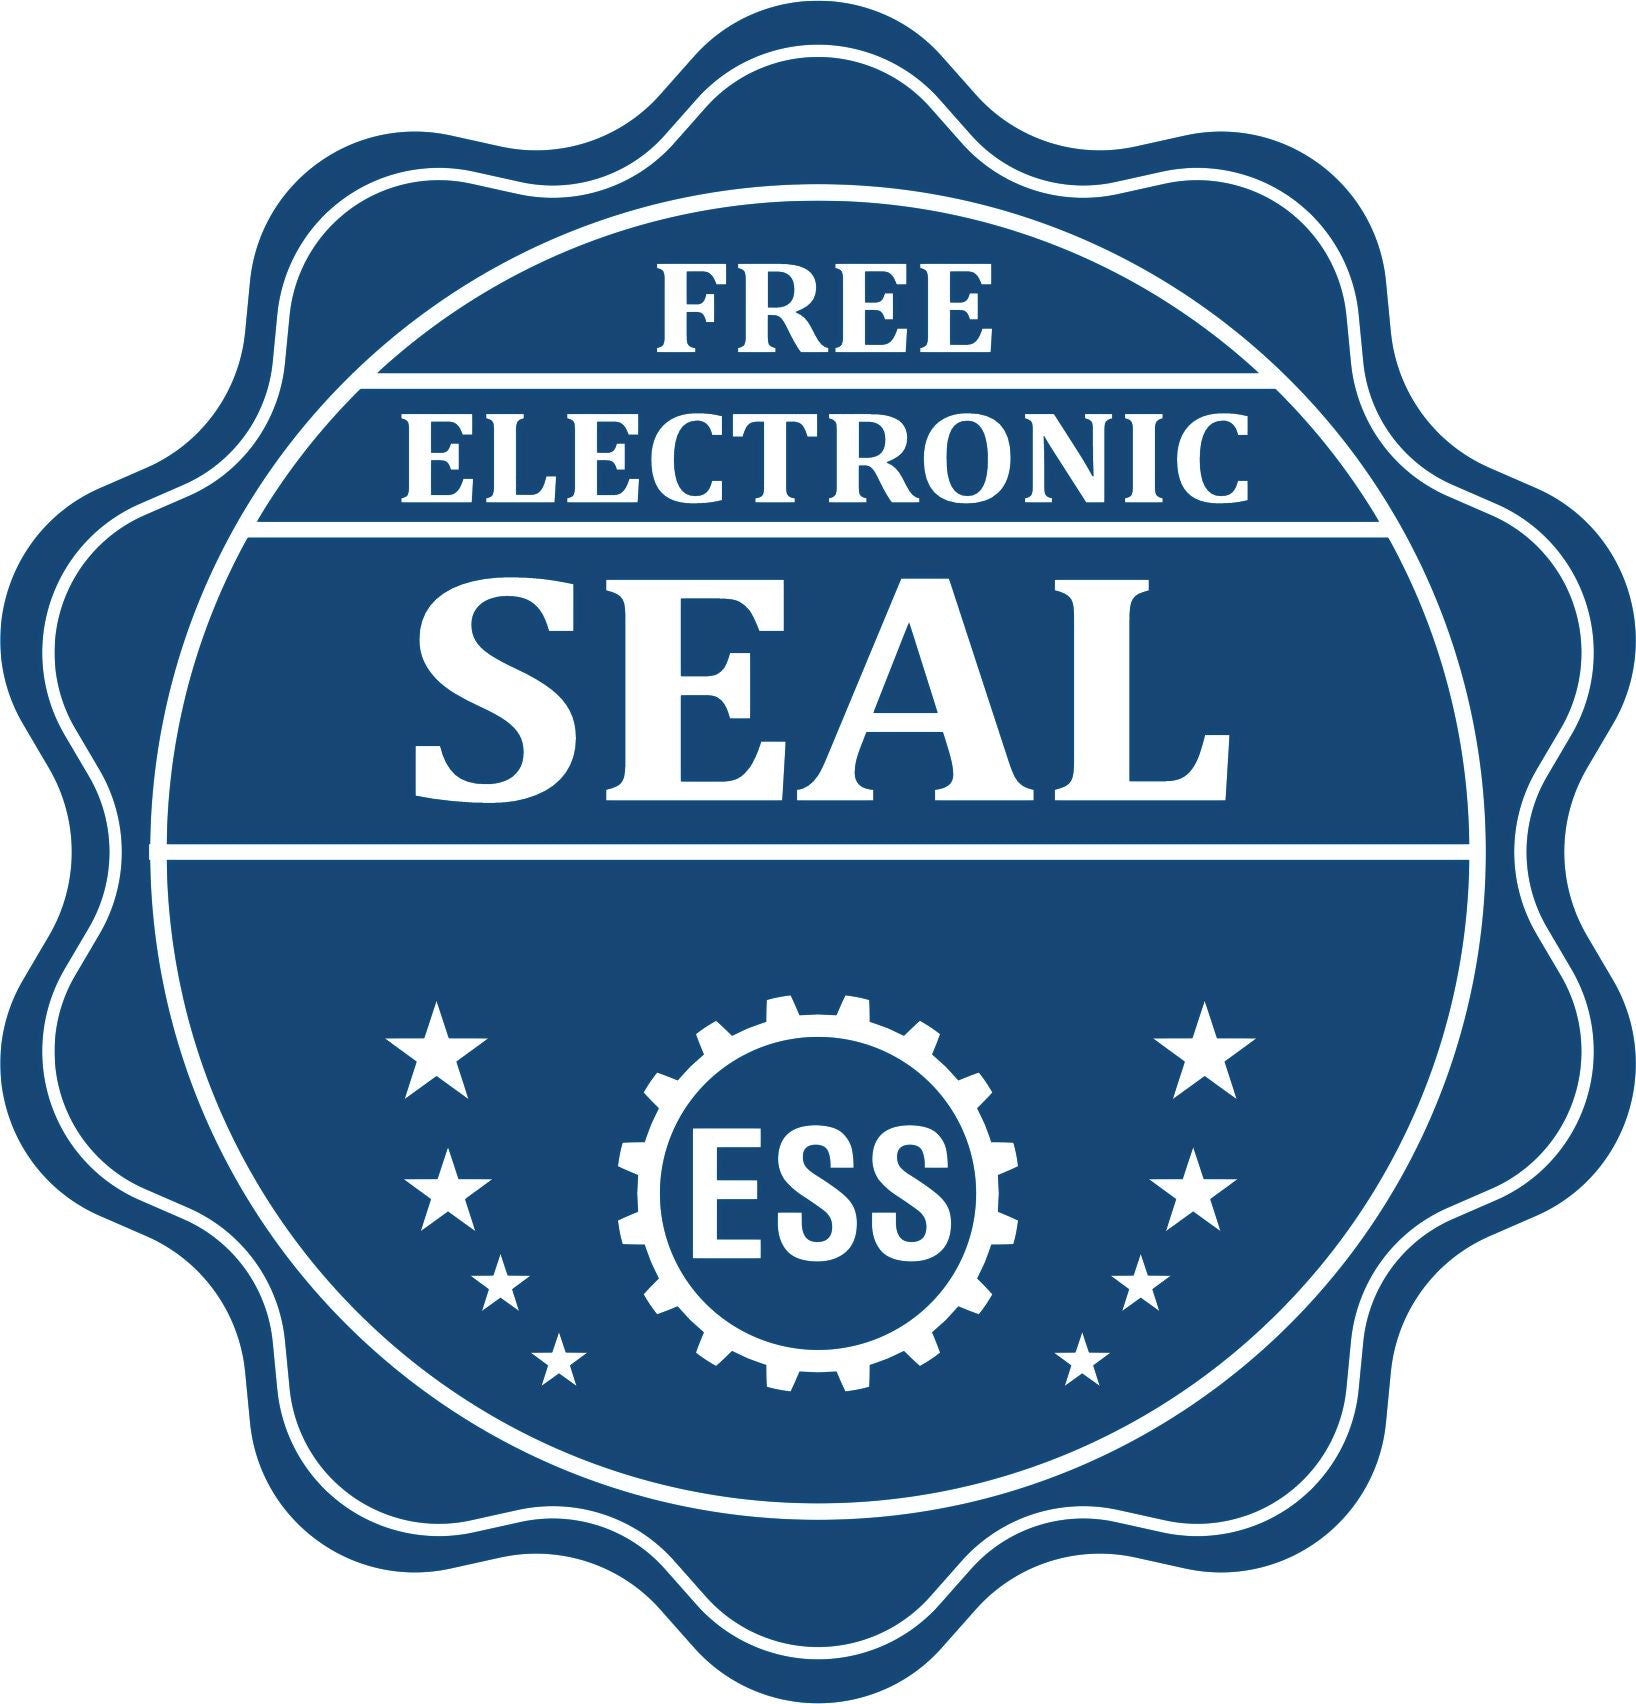 A badge showing a free electronic seal for the Slim Pre-Inked Tennessee Professional Geologist Seal Stamp with stars and the ESS gear on the emblem.